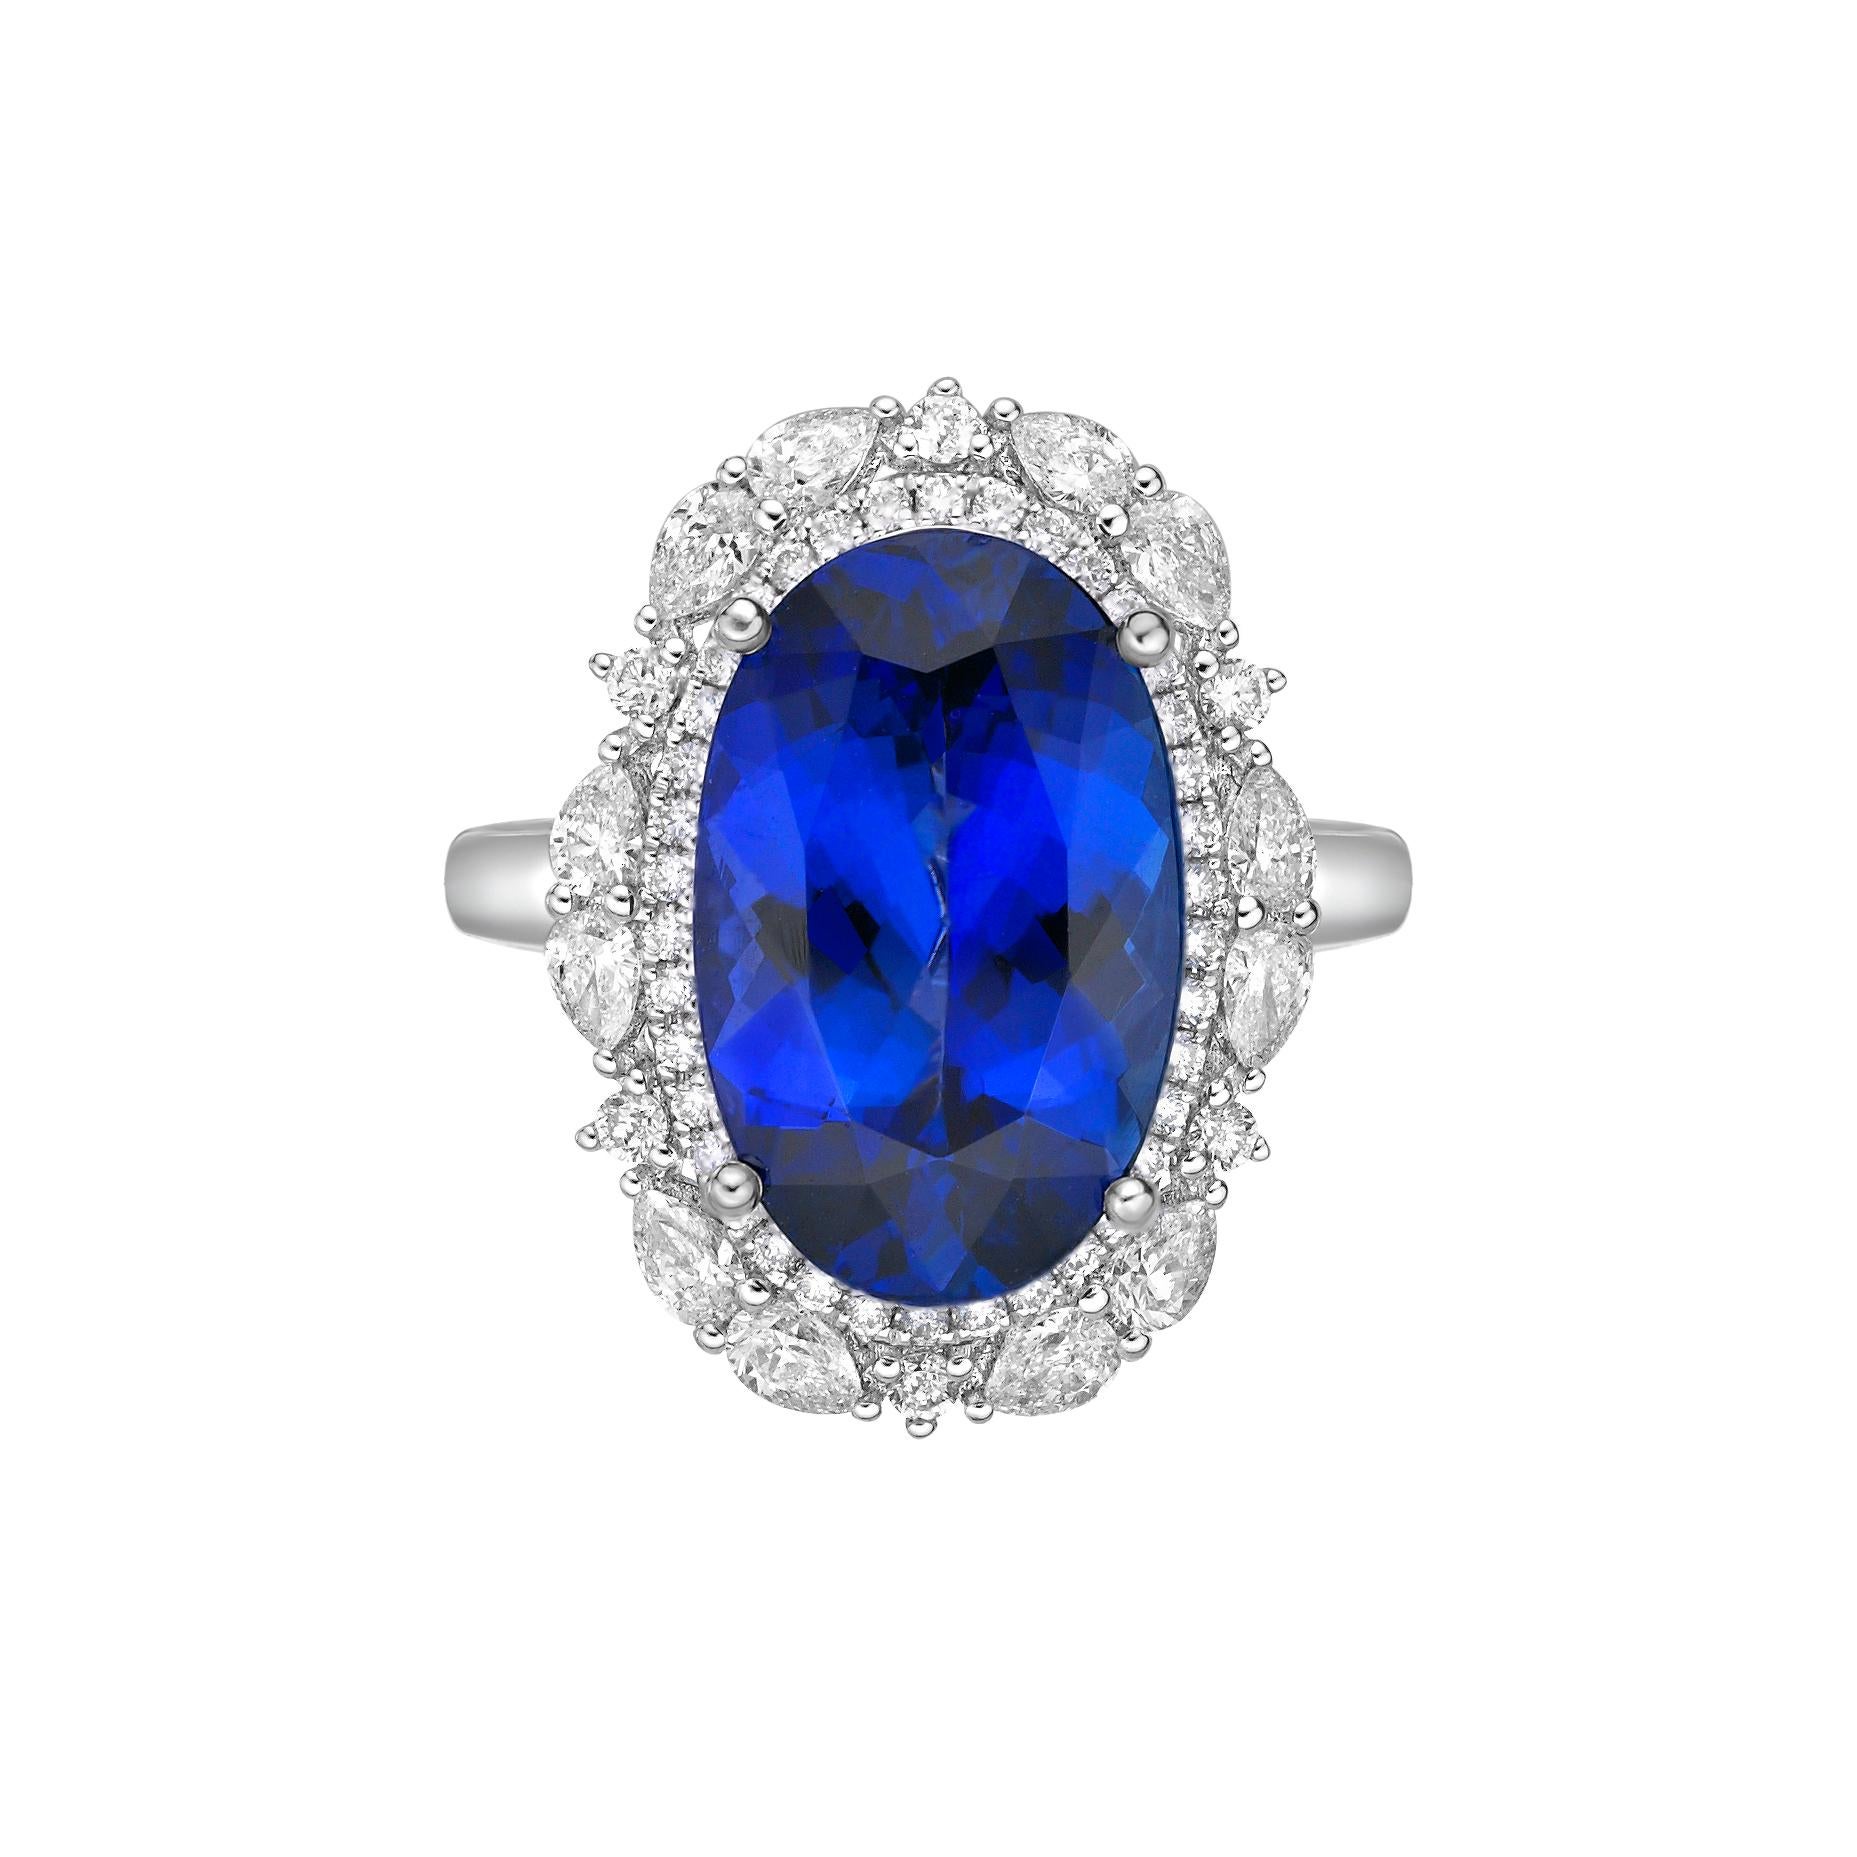 Oval Cut 7.3 Carat Tanzanite and White Diamond Ring in 18 Karat White Gold For Sale